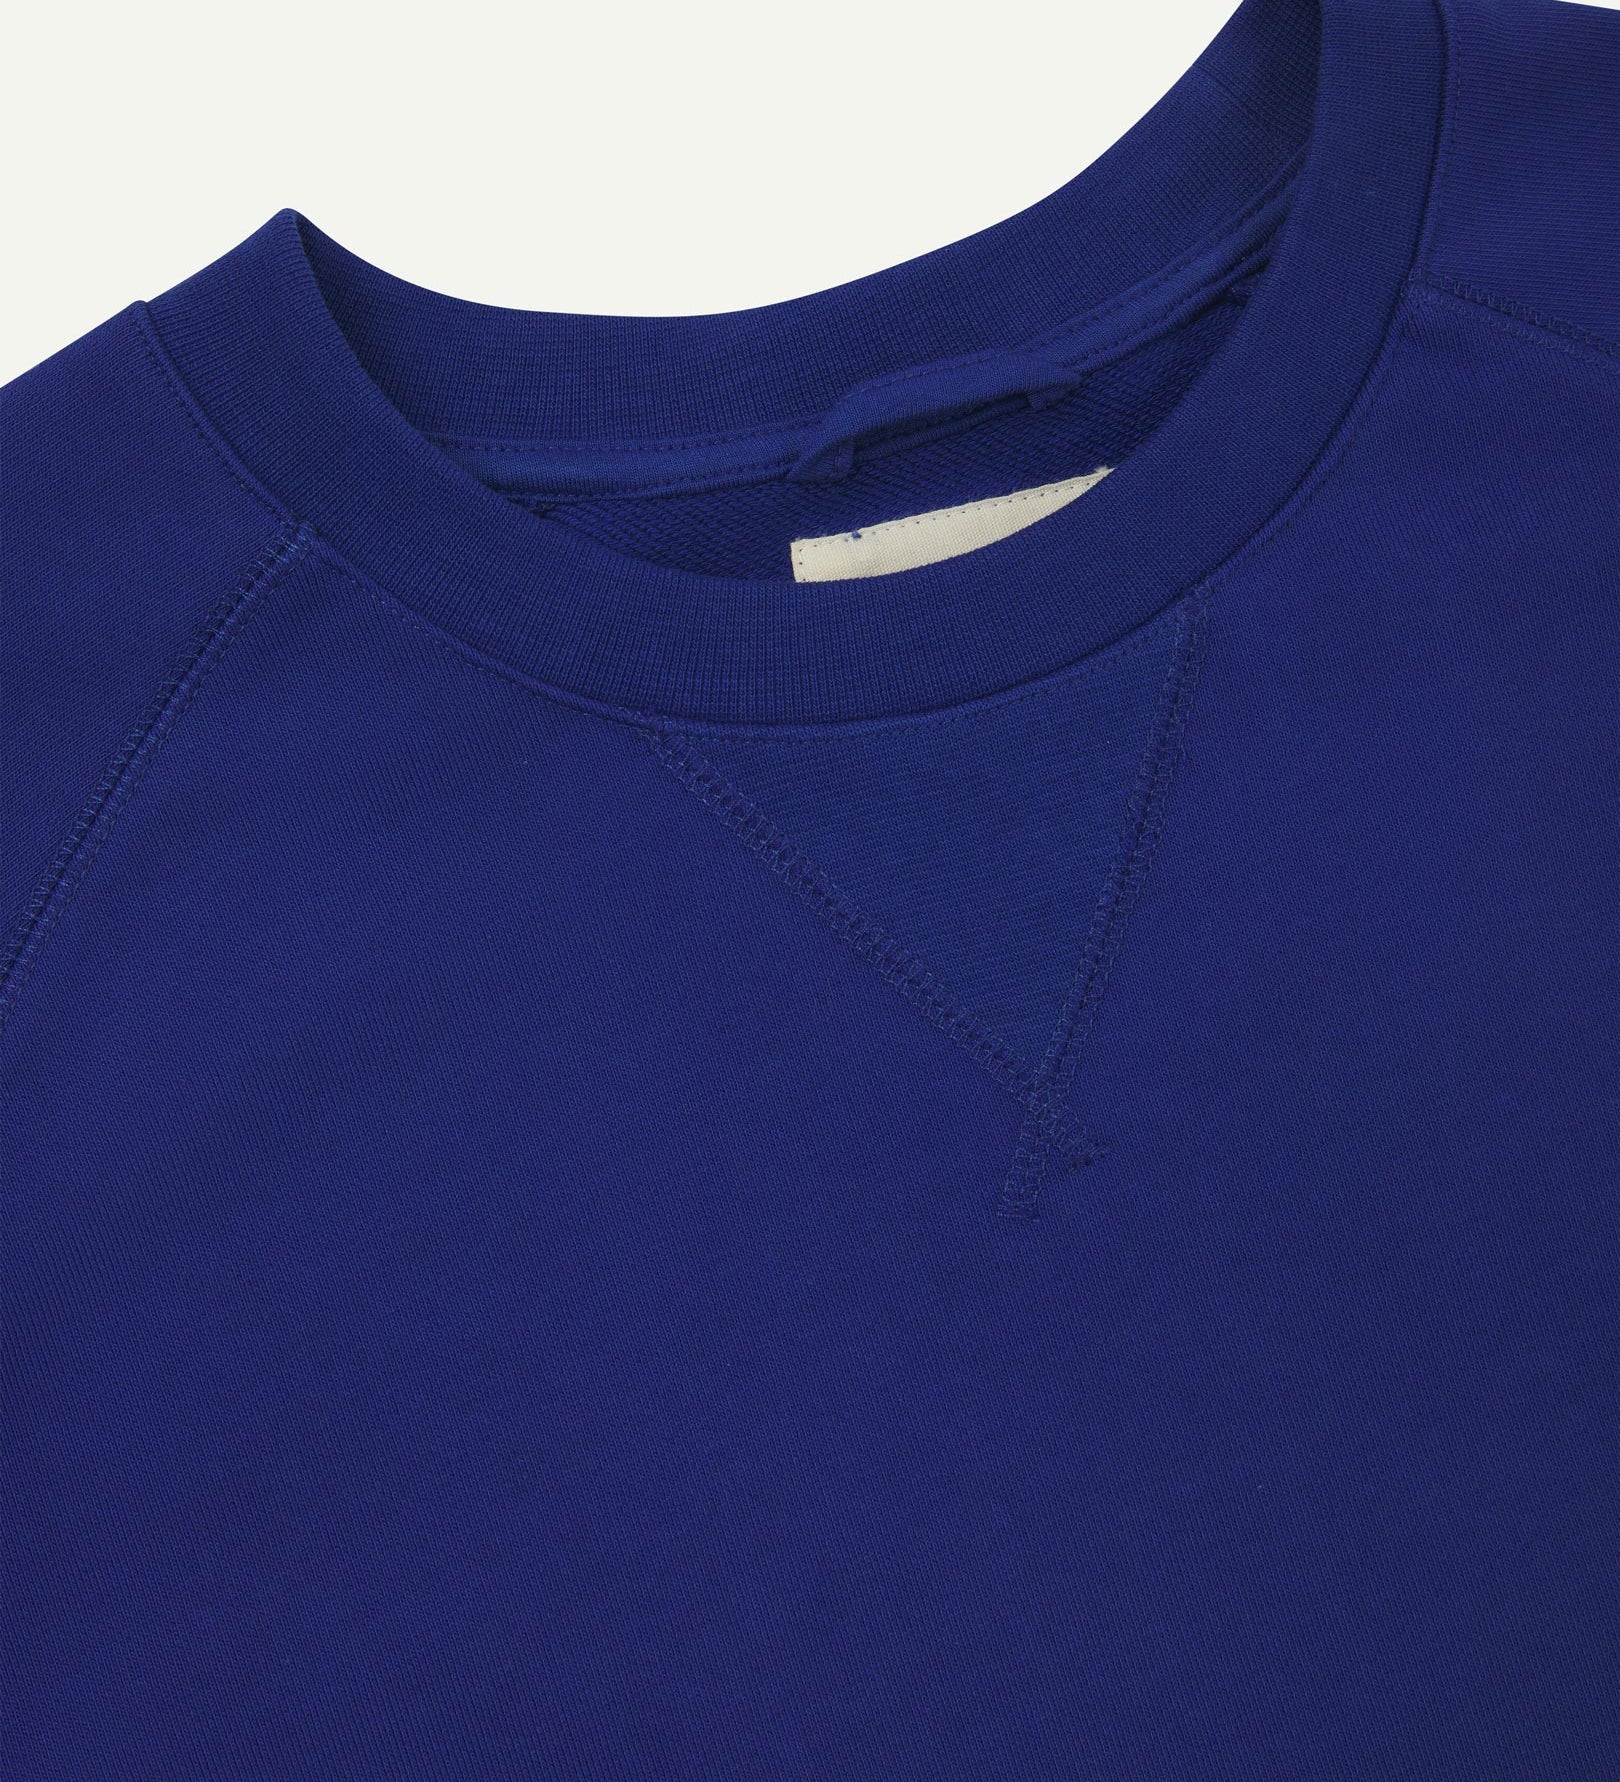 Close-up view of crew neck collar with decorative v-insert on Uskees ultra-blue heavyweight cotton jersey sweatshirt.